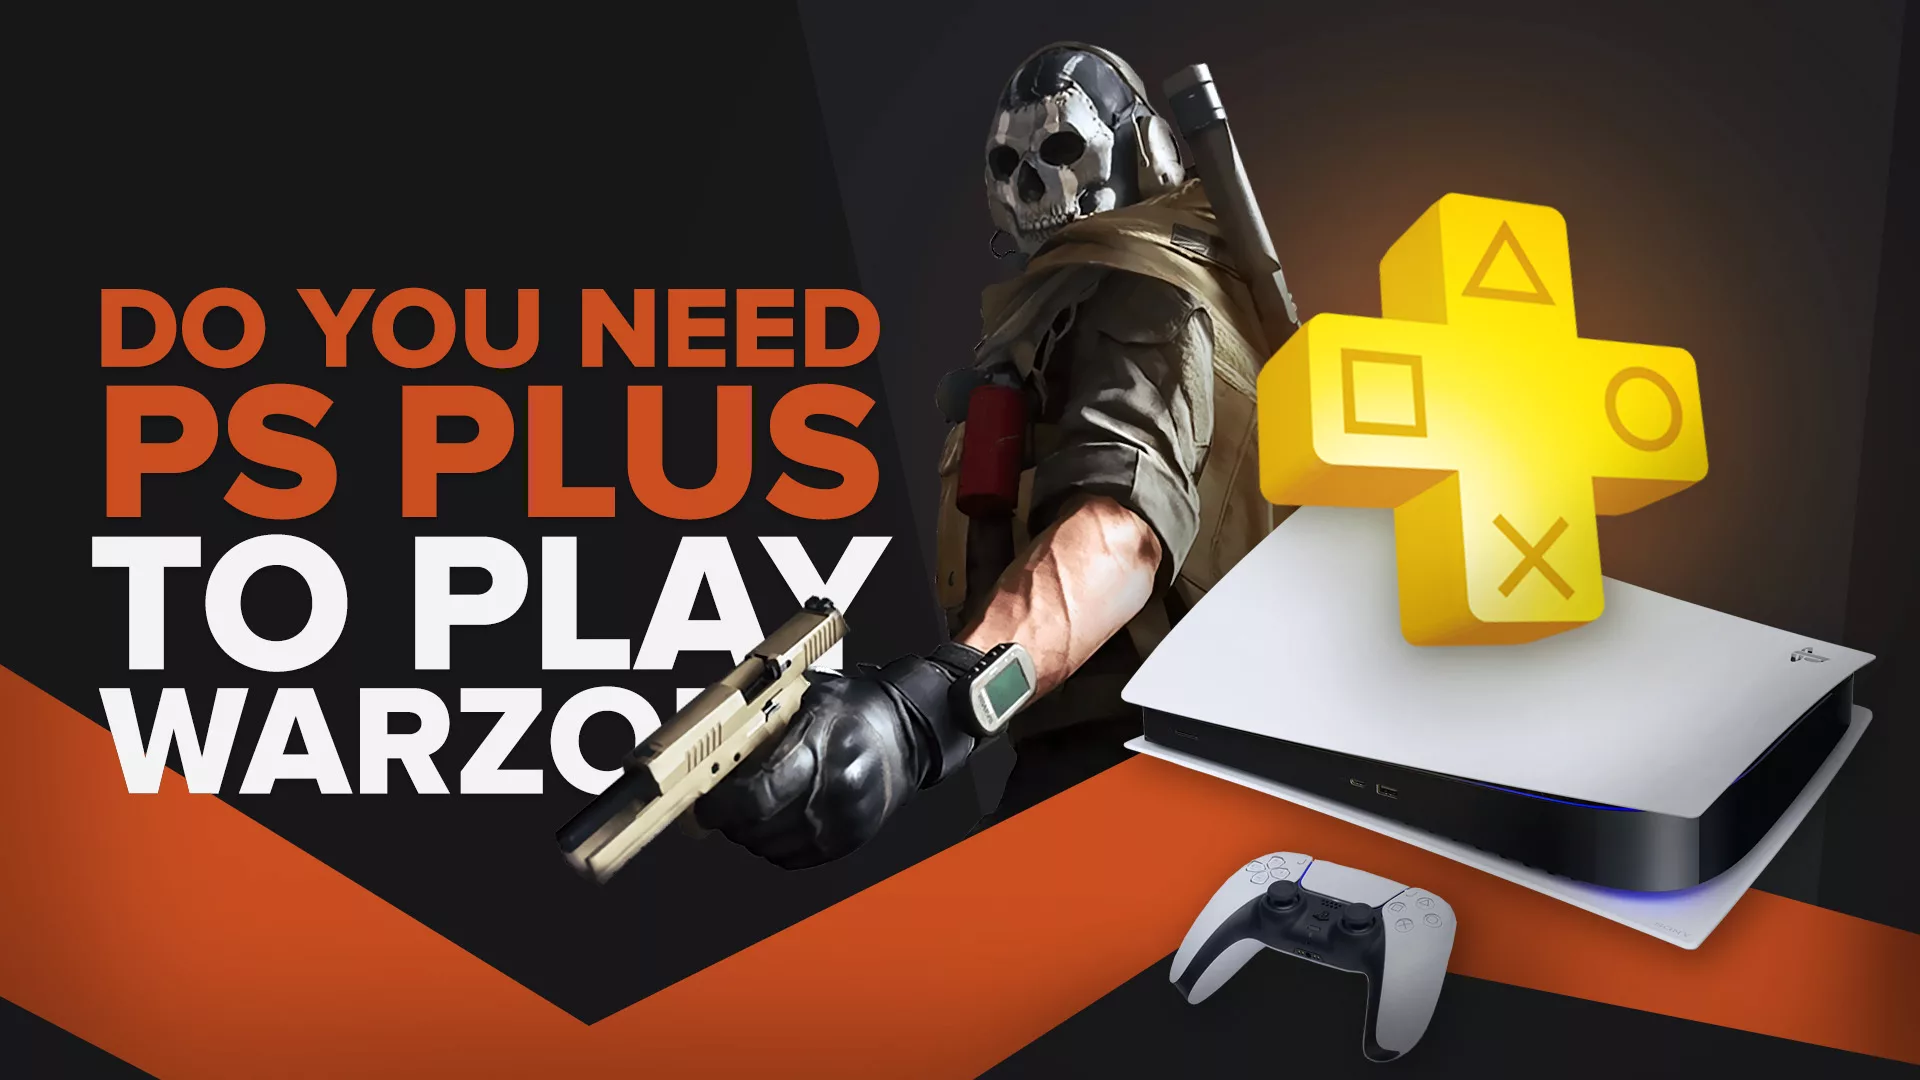 Do You Need PS Plus to Play Warzone?